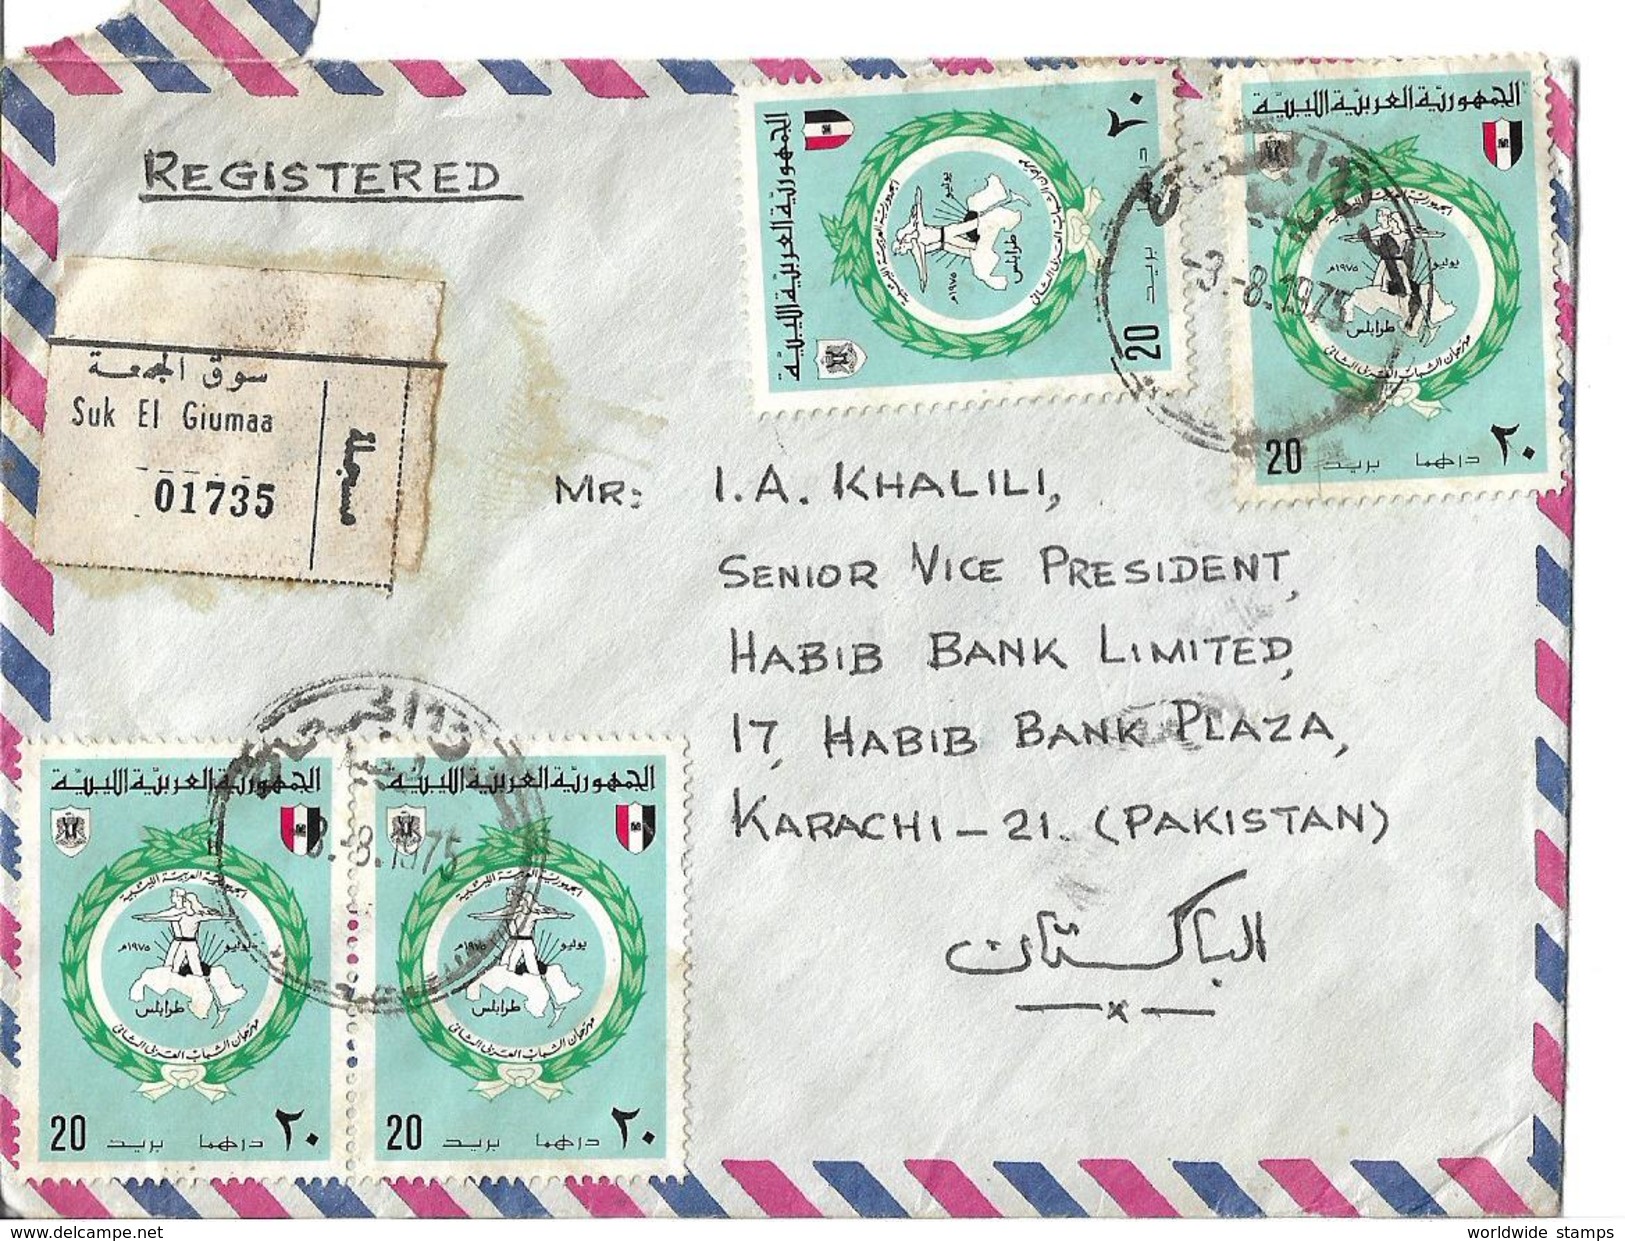 Libya Registered Airmail 1975 Emblem 20d 2nd Arab Youth Festival 8 Stamps Postal History Cover Sent To Pakistan. - Bangladesch